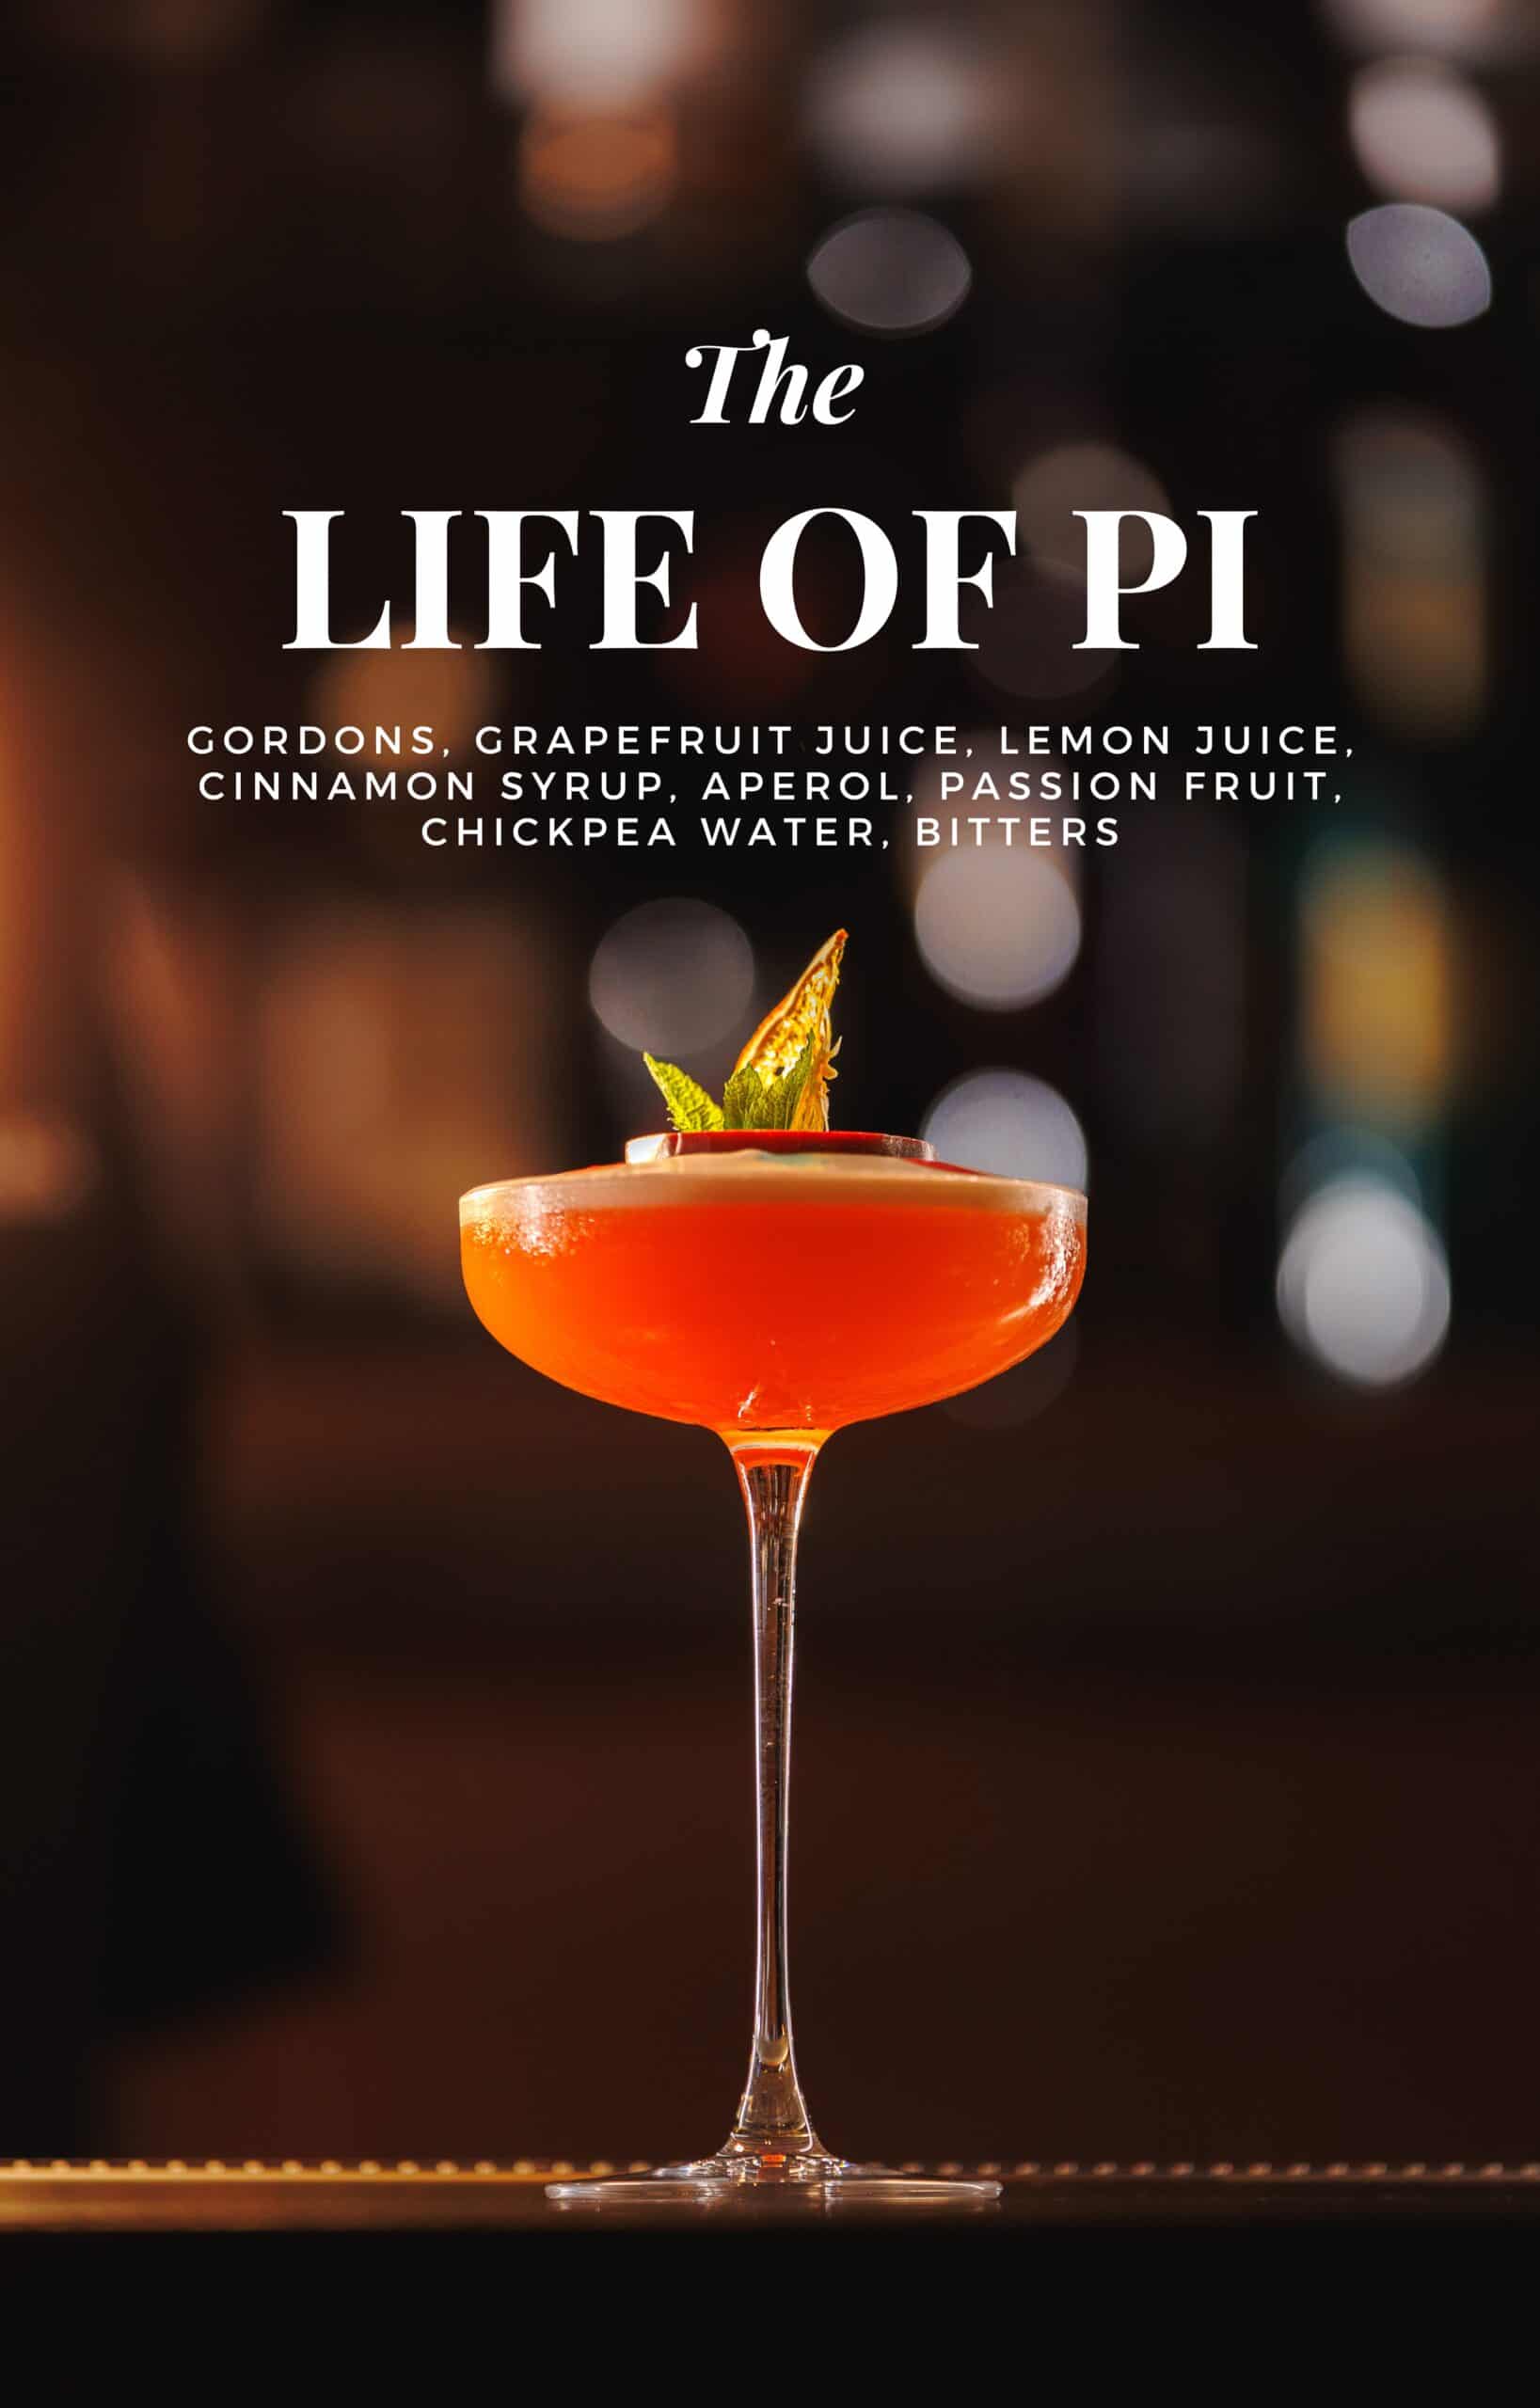 life of Pi cocktail